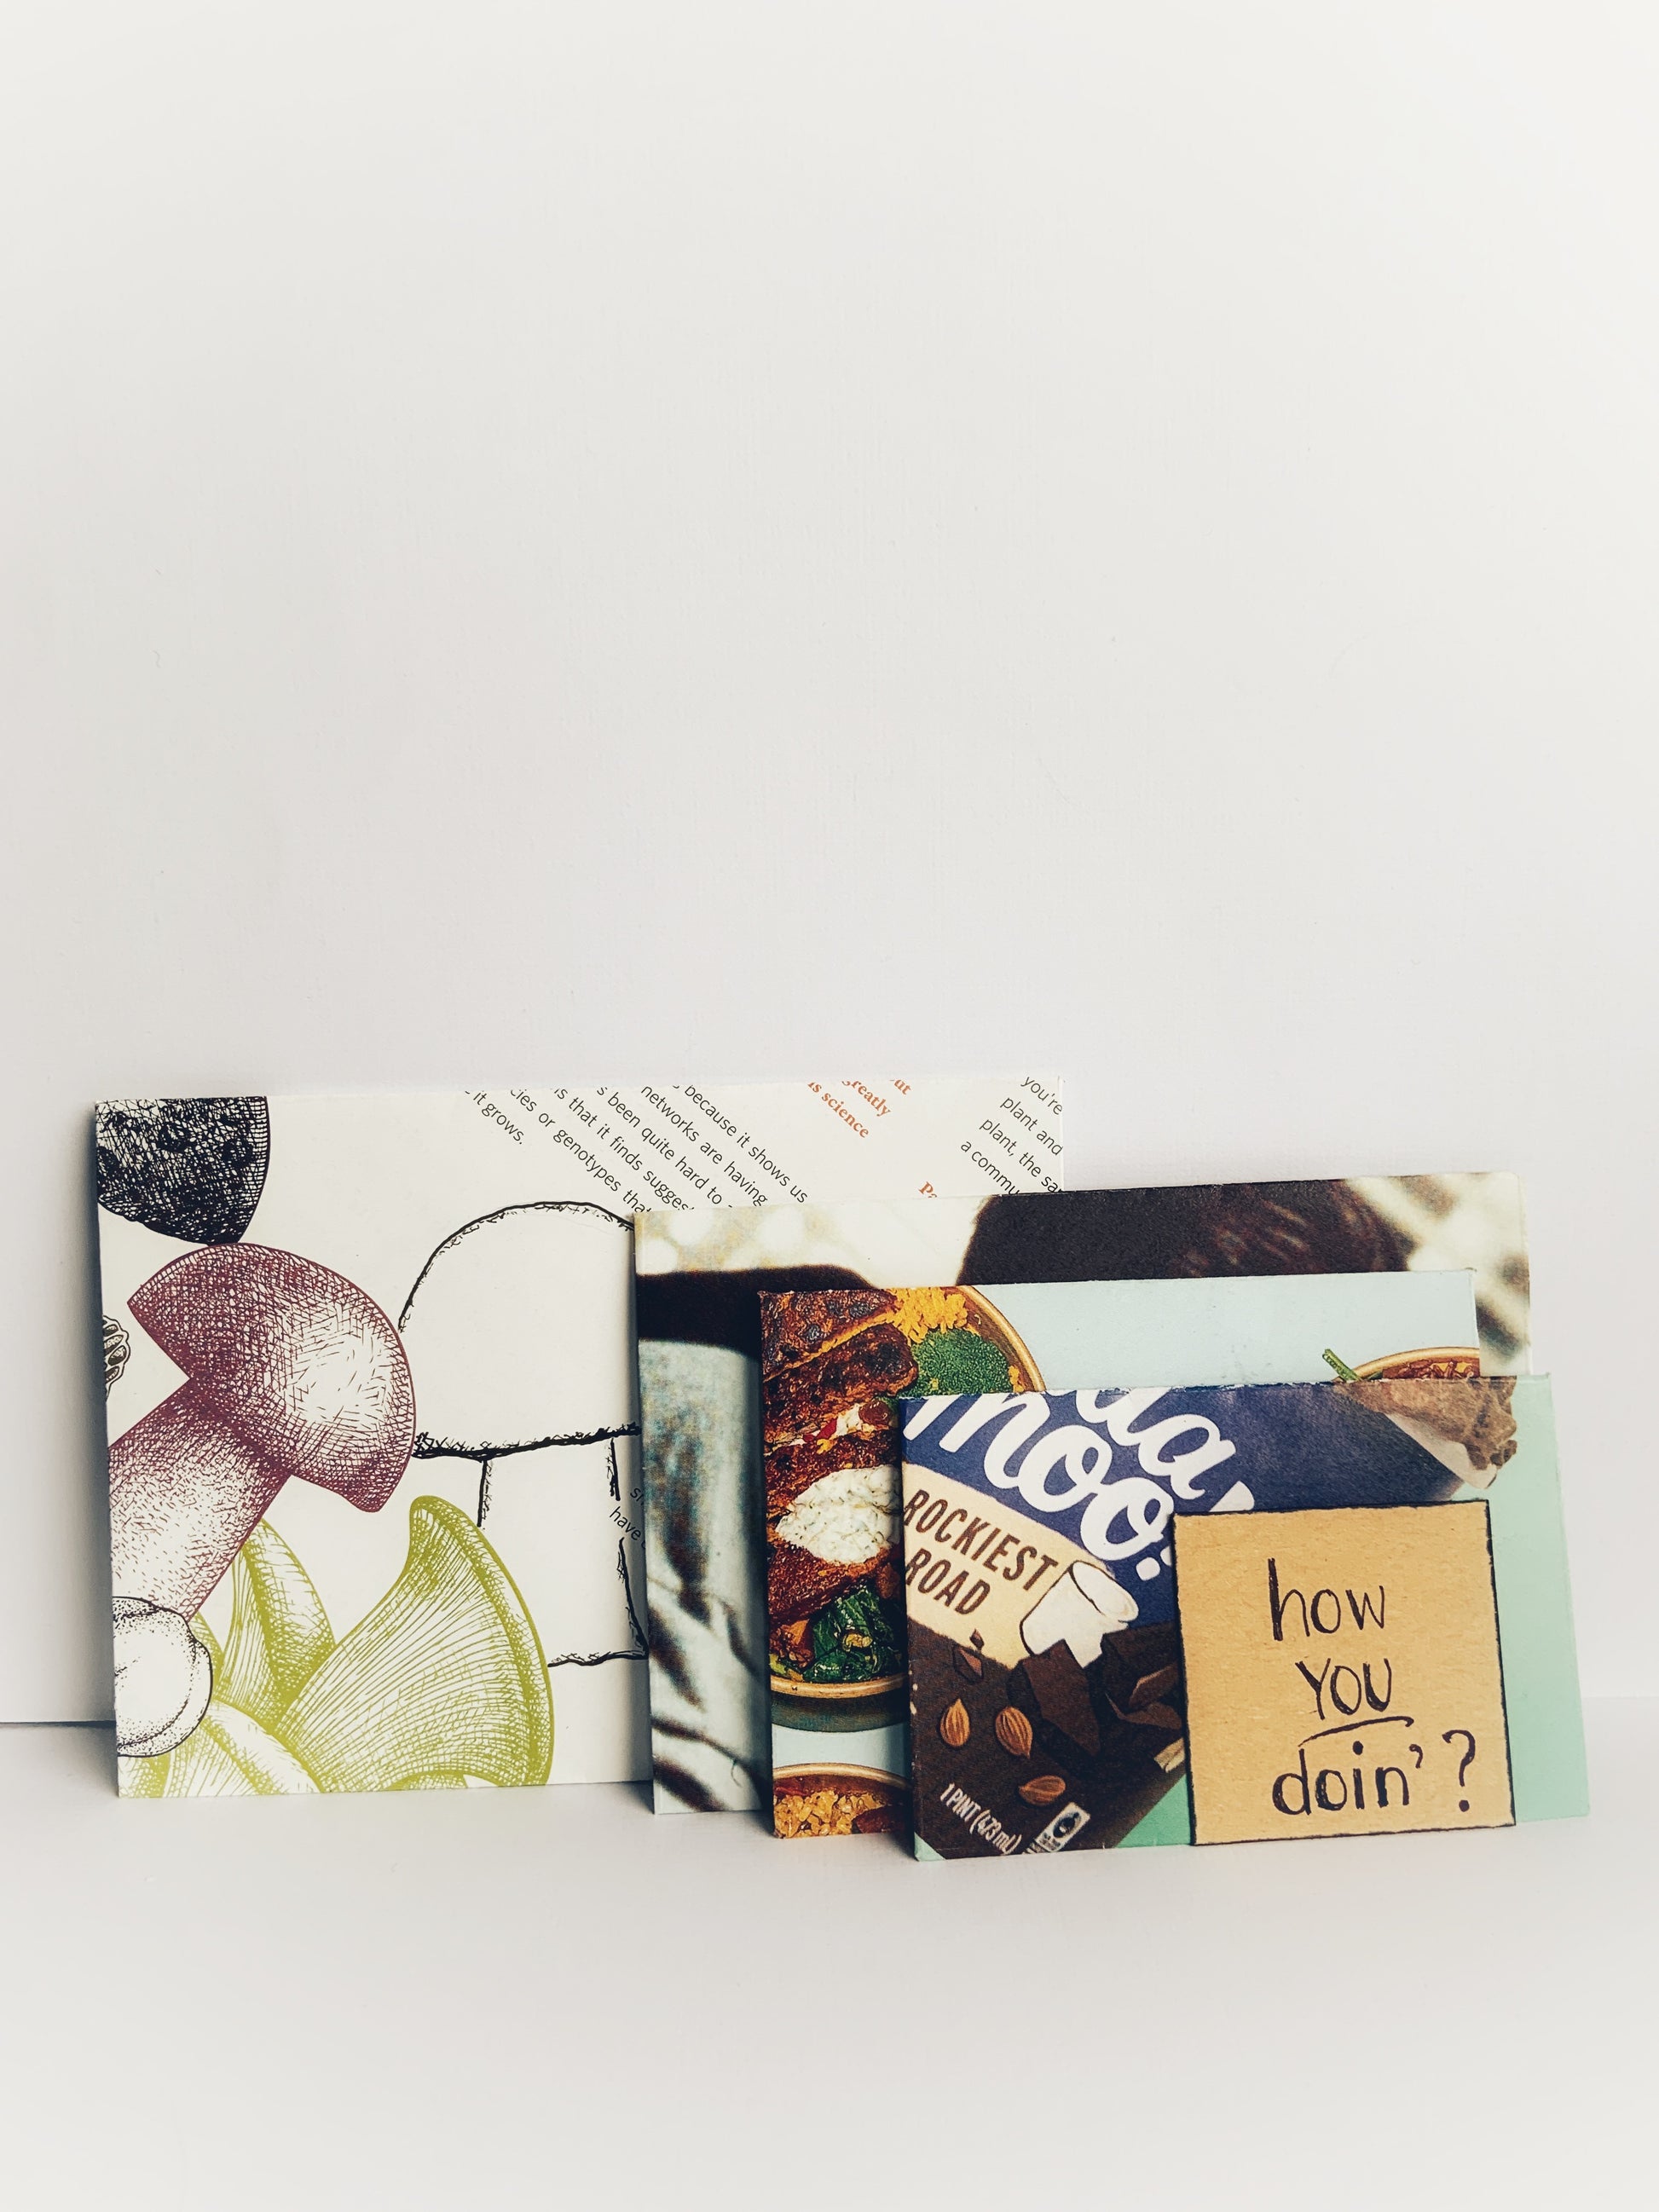 Handmade nesting envelopes made from magazine pages with a note saying how you doin'?